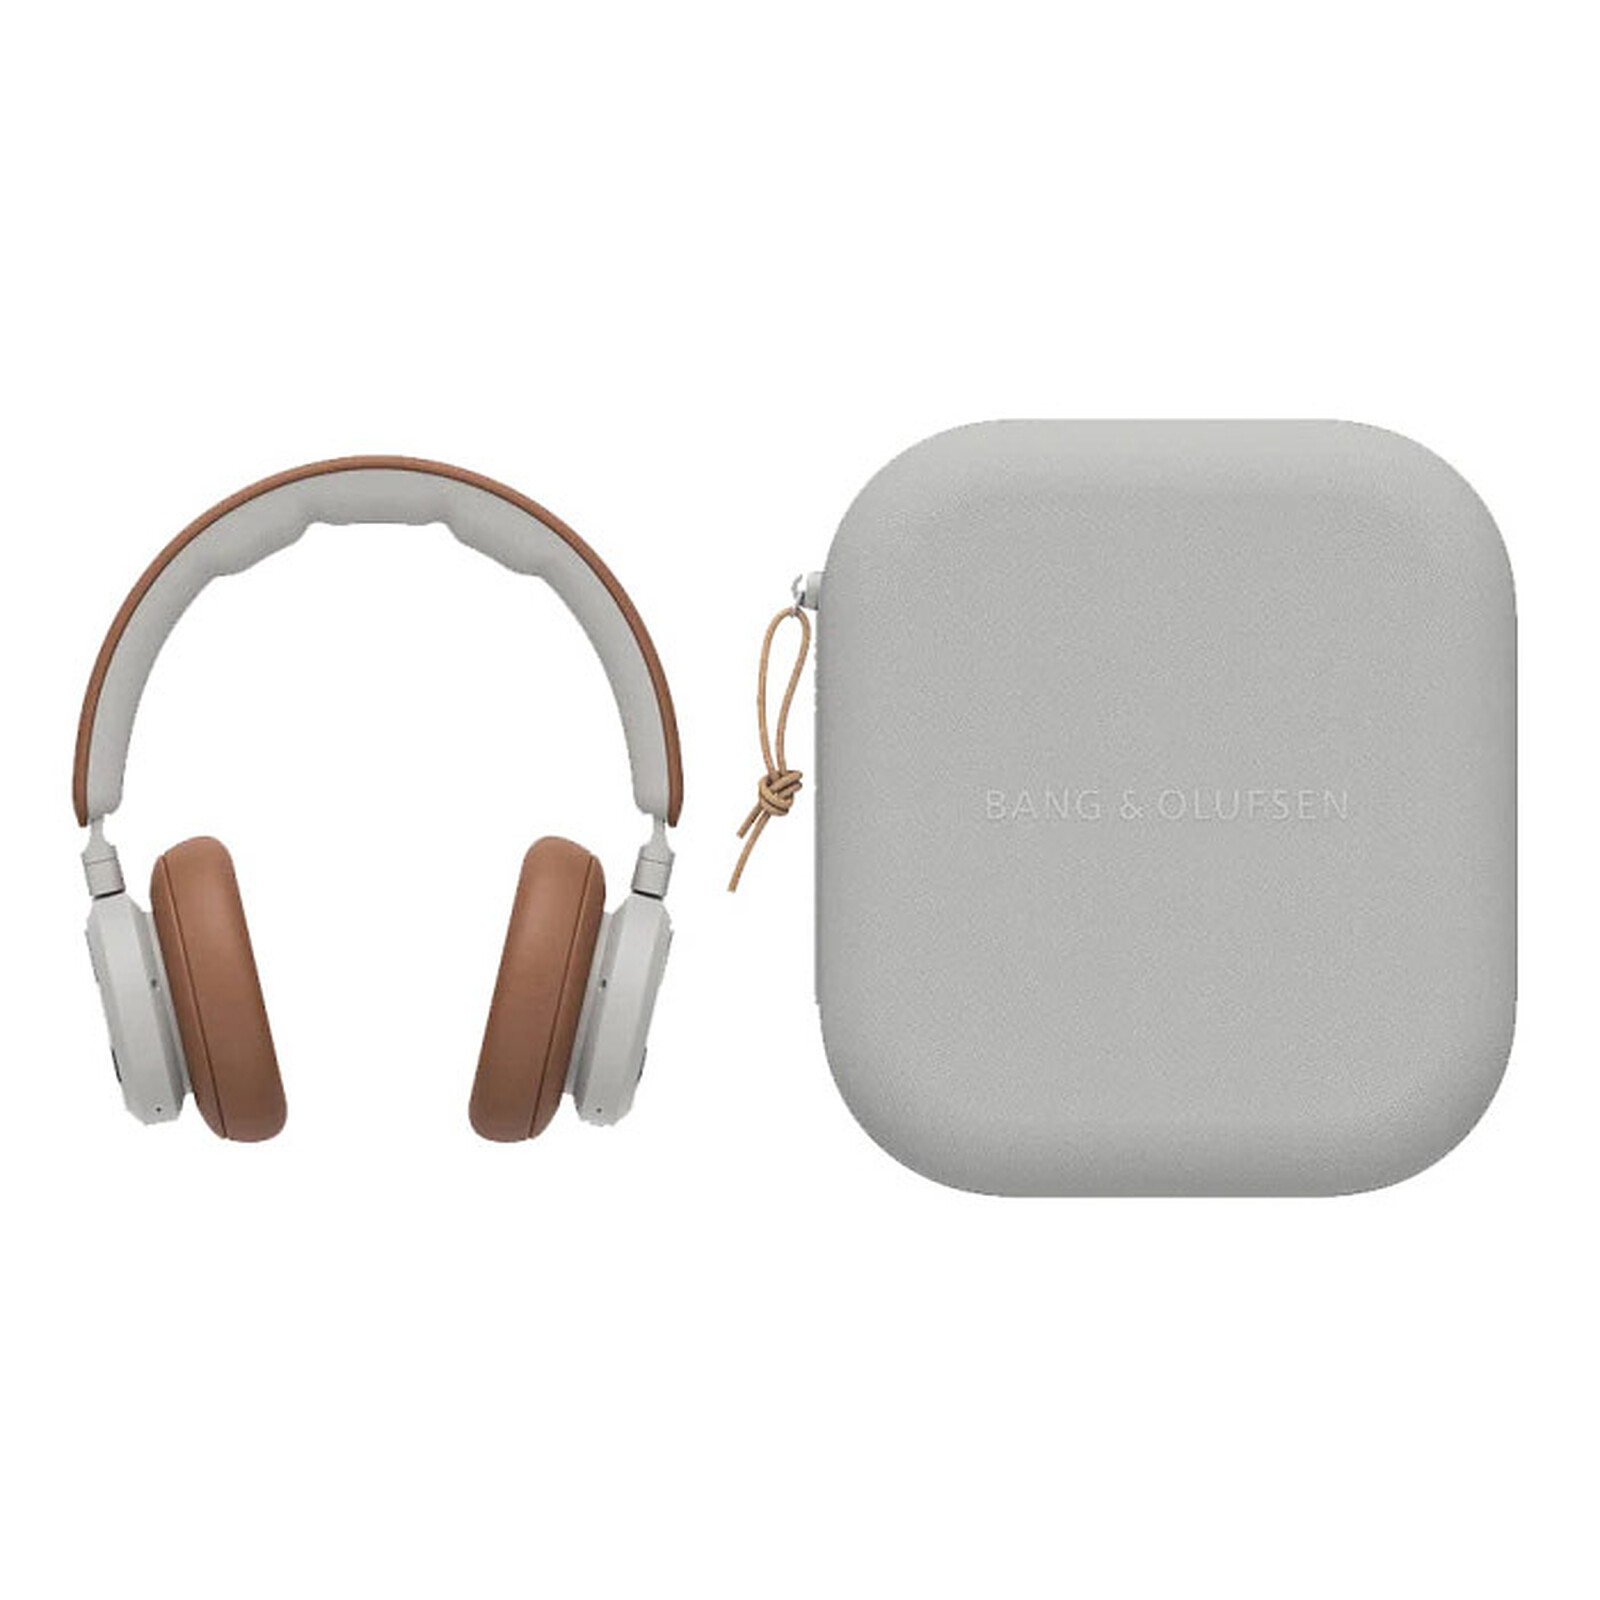 AURICULARES DIADEMA BLUETOOTH BANG Y OLUFSEN BEOPLAY H9 + ESTUCHE + CABLES  (9)